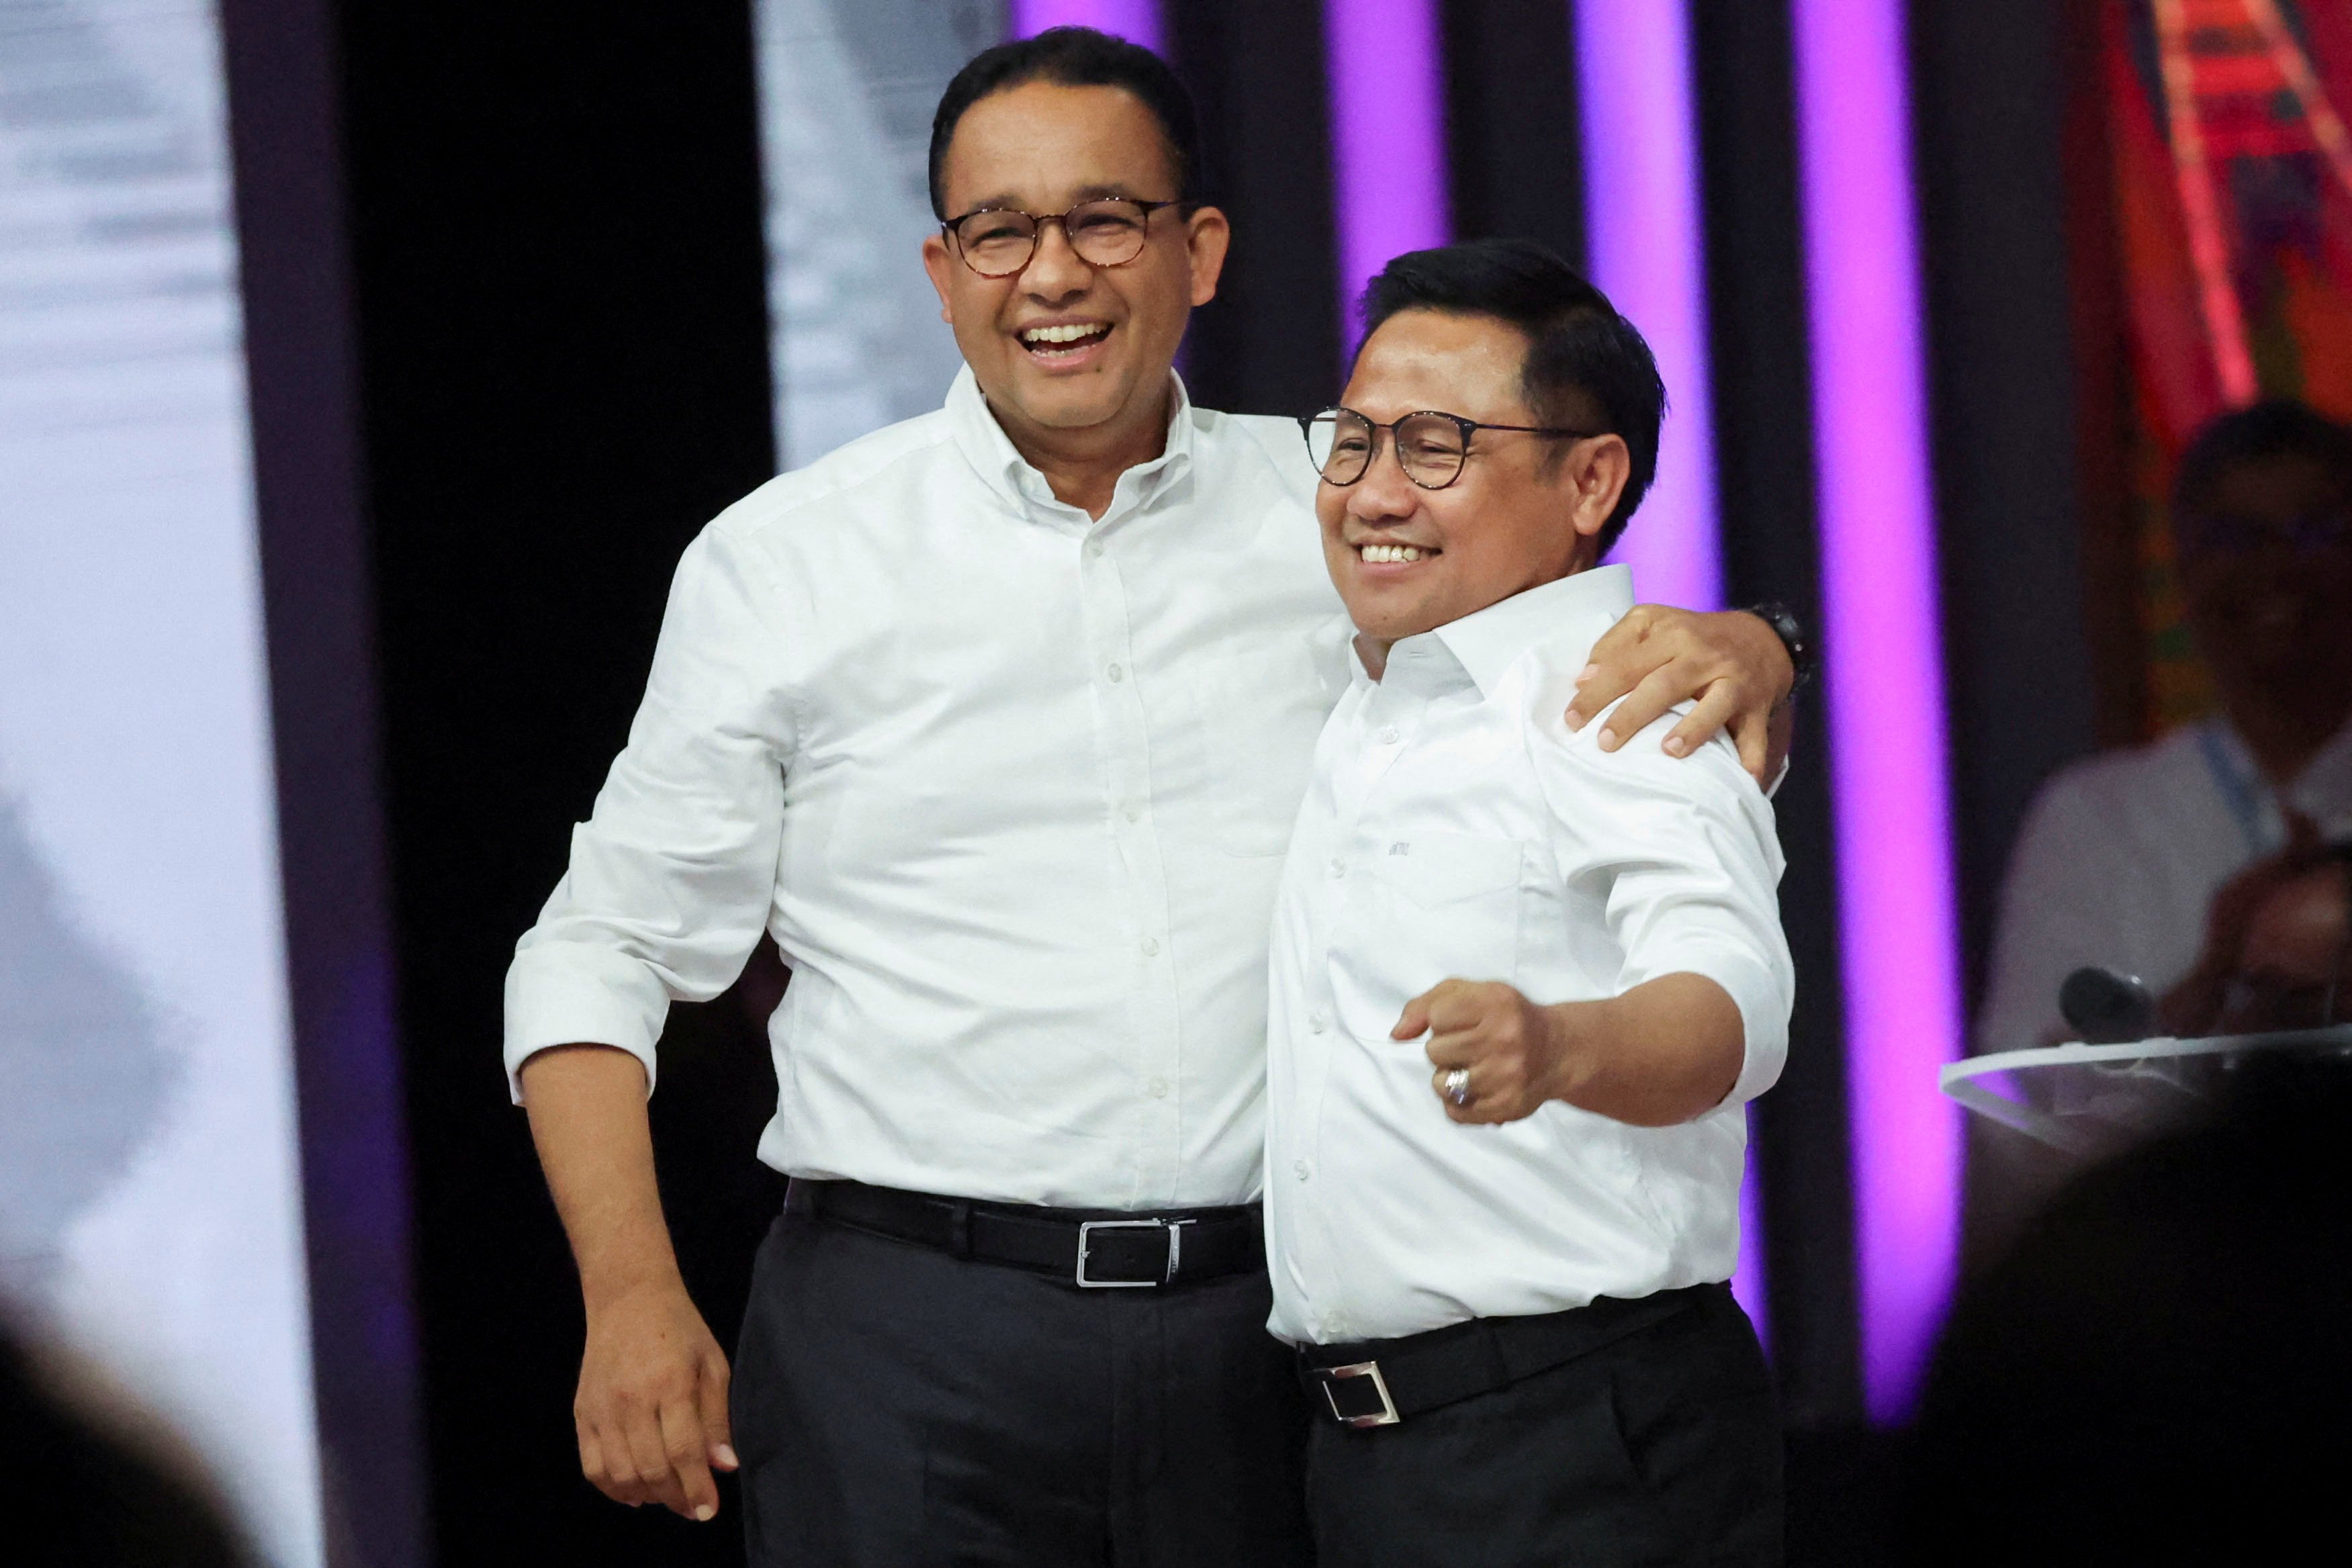 Presidential candidate Anies Baswedan and his running mate Muhaimin Iskandar react during a televised debate on Sunday. Photo: Reuters